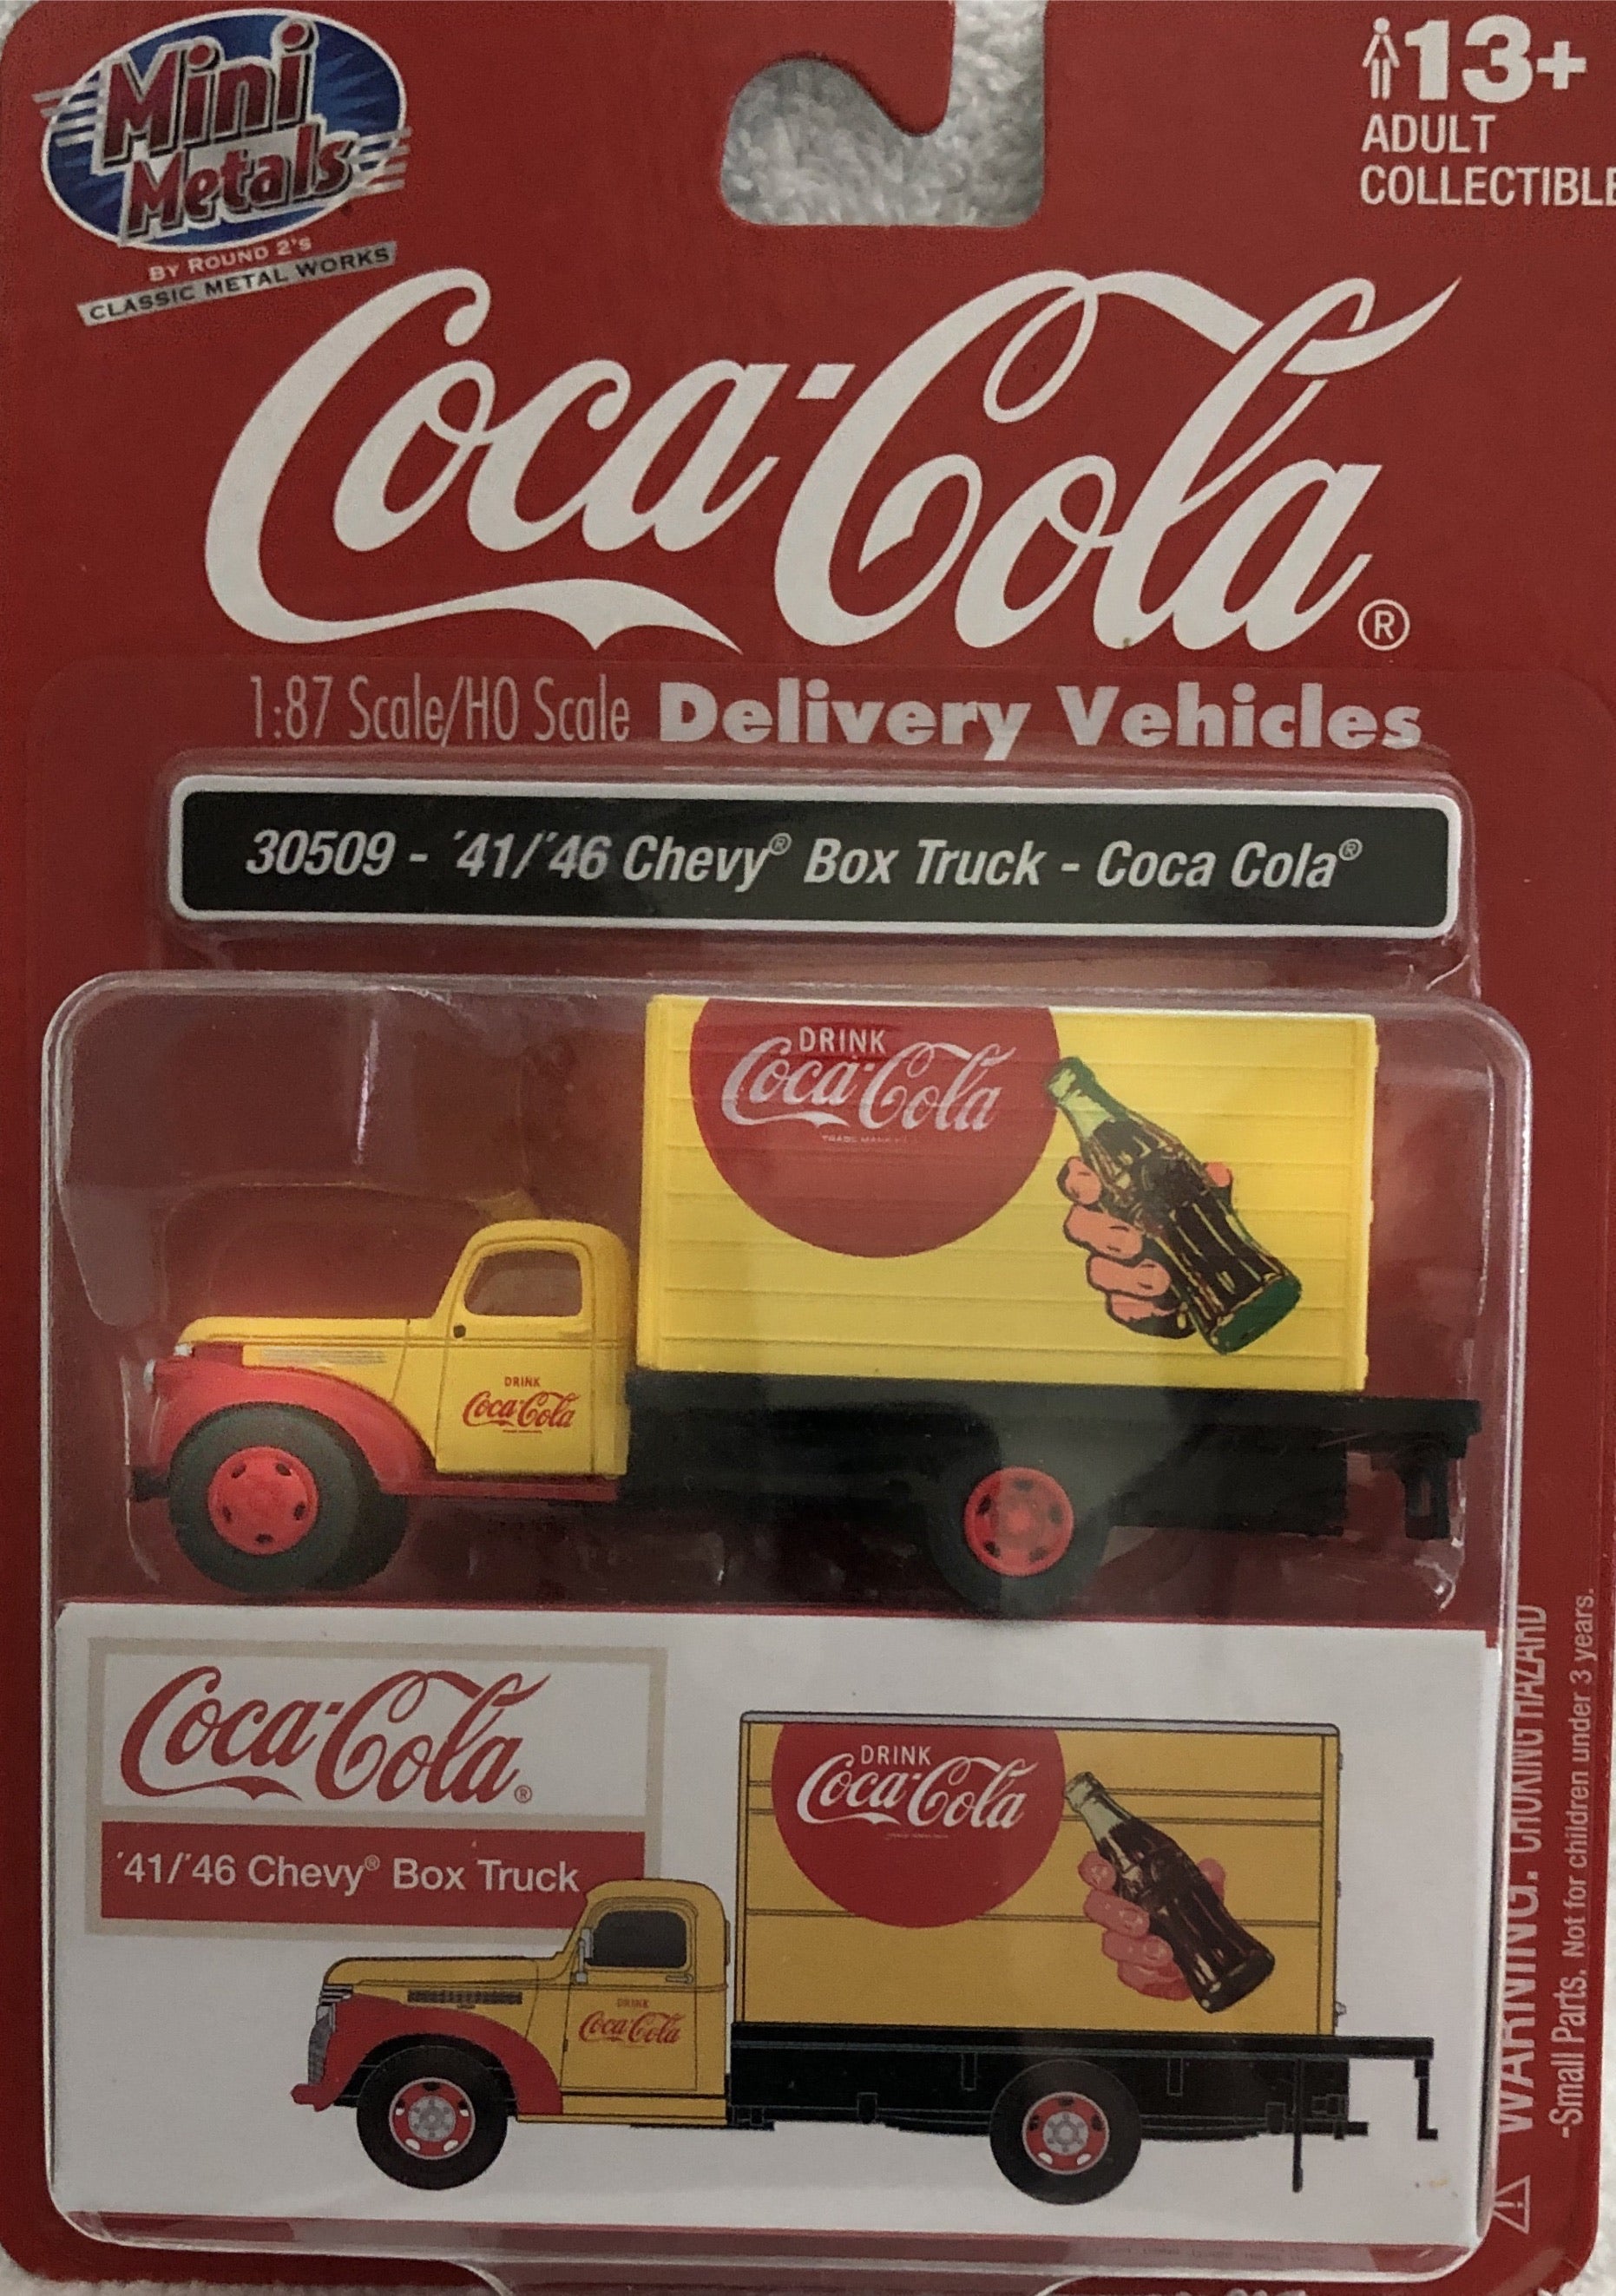  Classic Metal Works 1941-46 Chevrolet Box Truck (Coca-Cola) 1:87 HO Scale